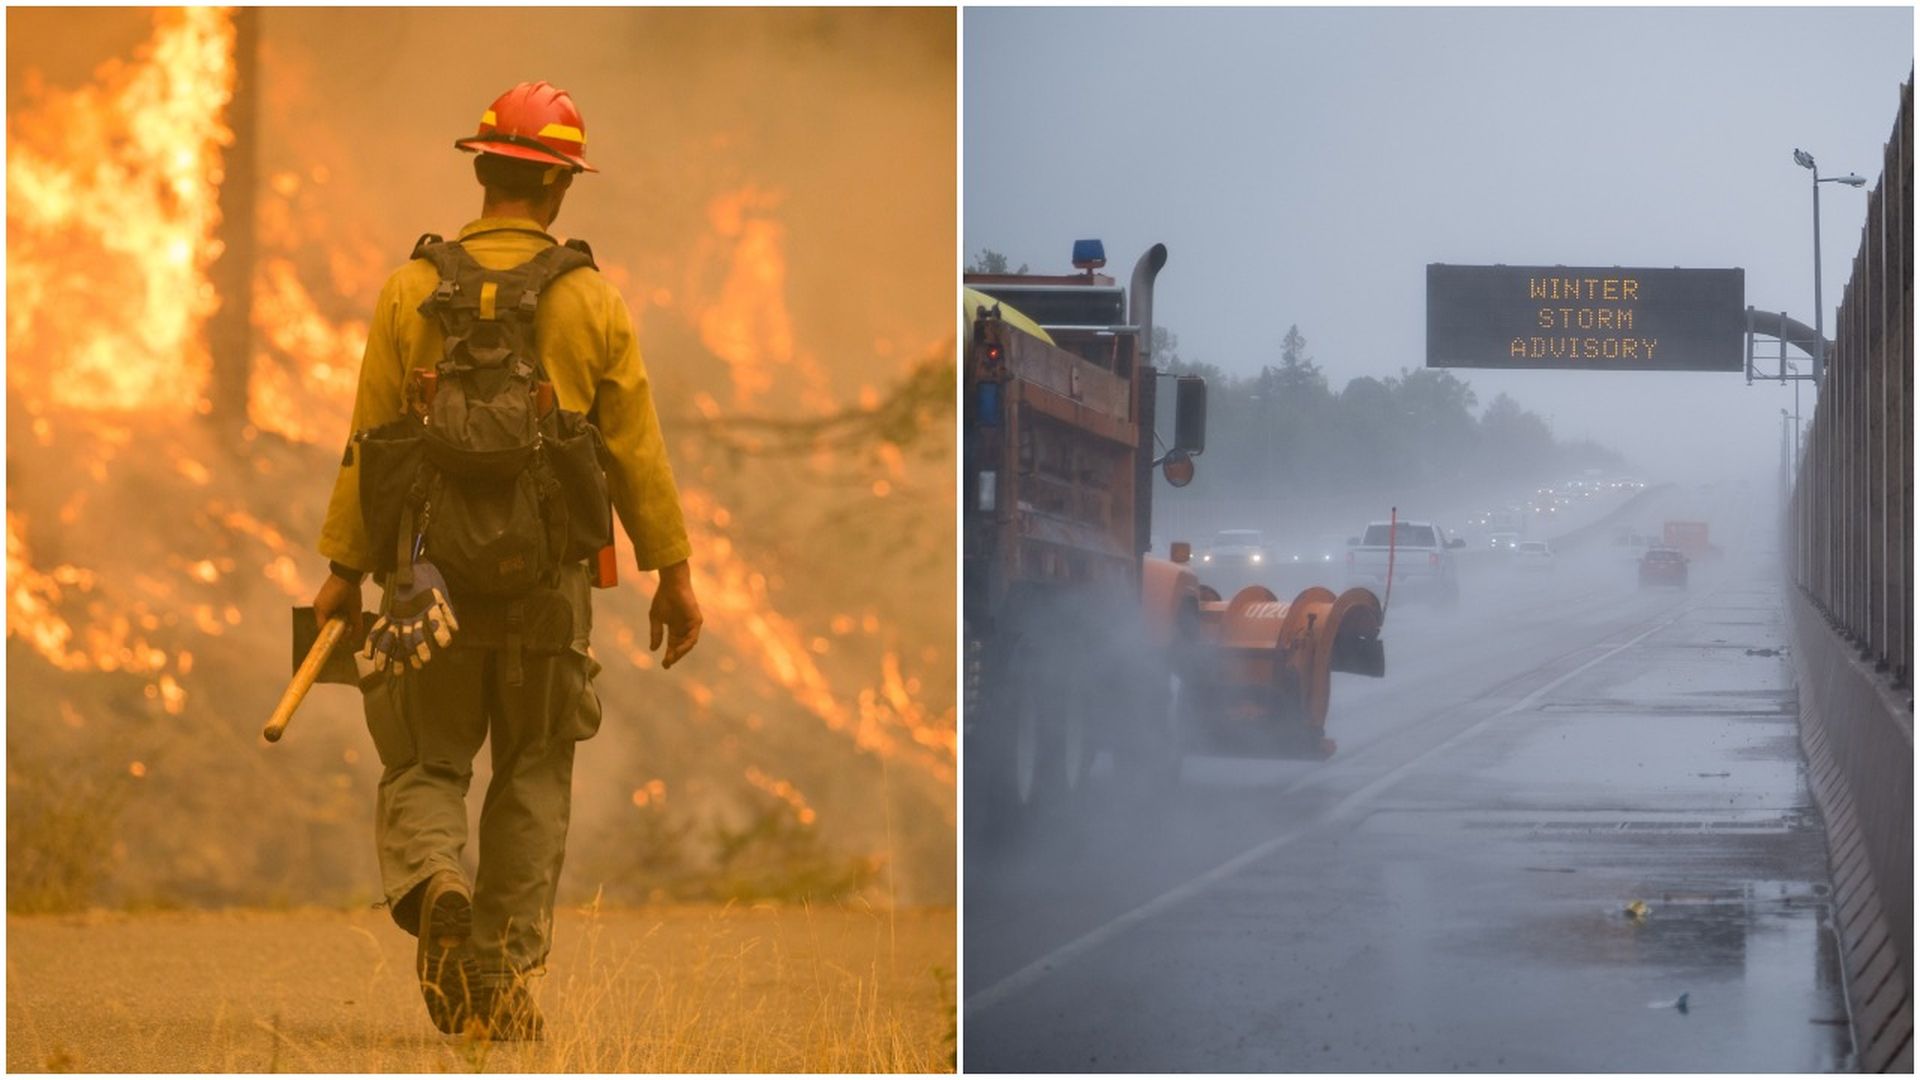 20 large wildfires are buring in Oregon and Washington as of Tuesday, per the Pacific Northwest Region of the Forest Service. 